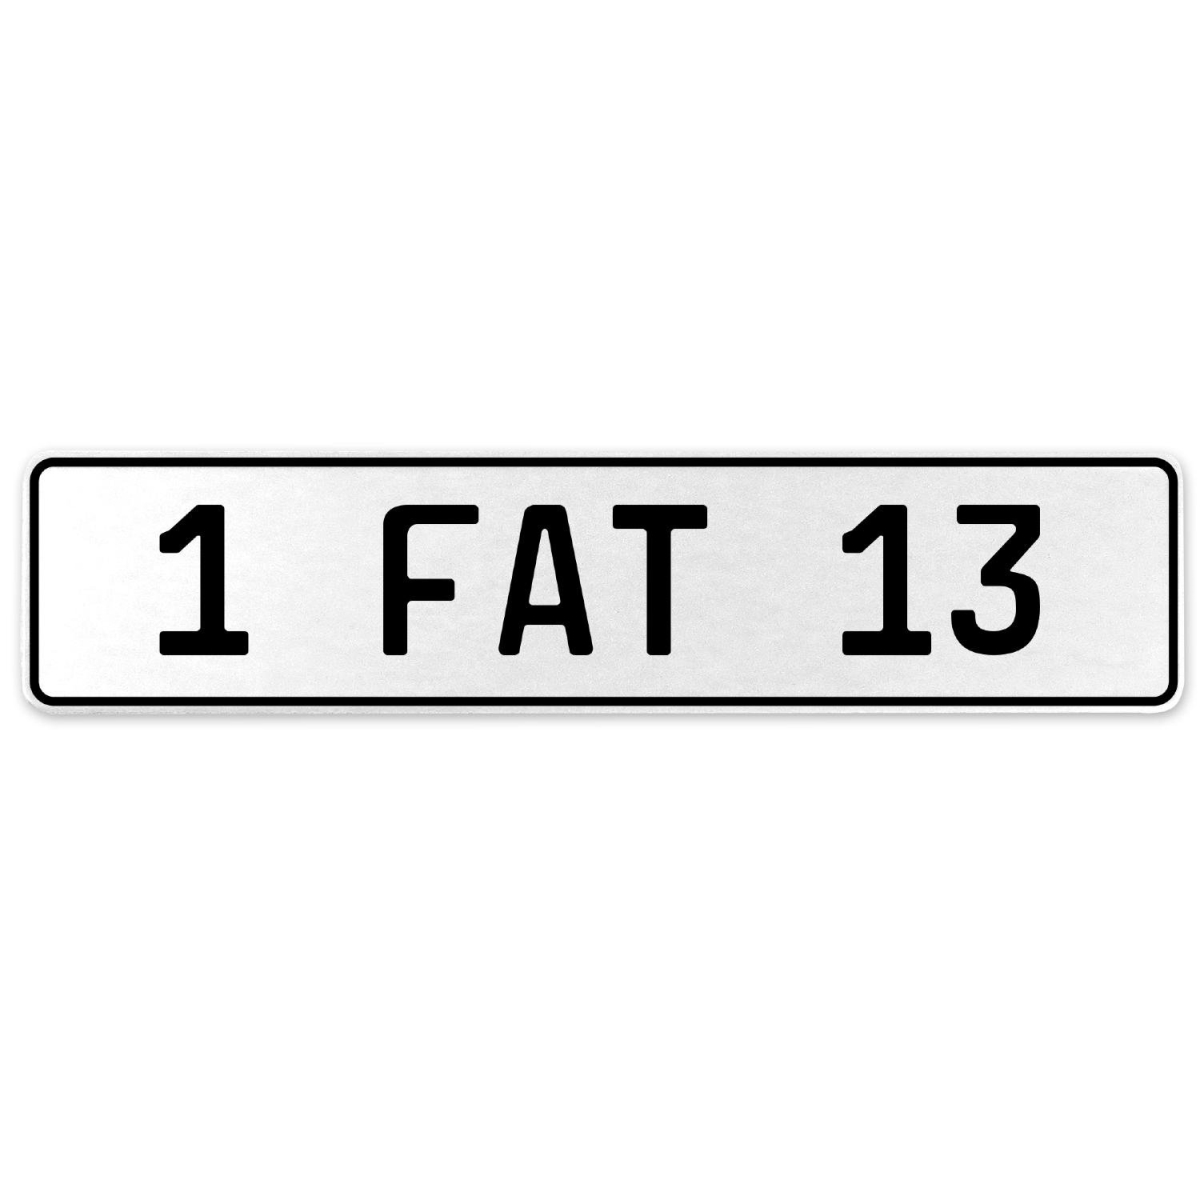 554610 1 Fat 13 - White Aluminum Street Sign Mancave Euro Plate Name Door Sign Wall